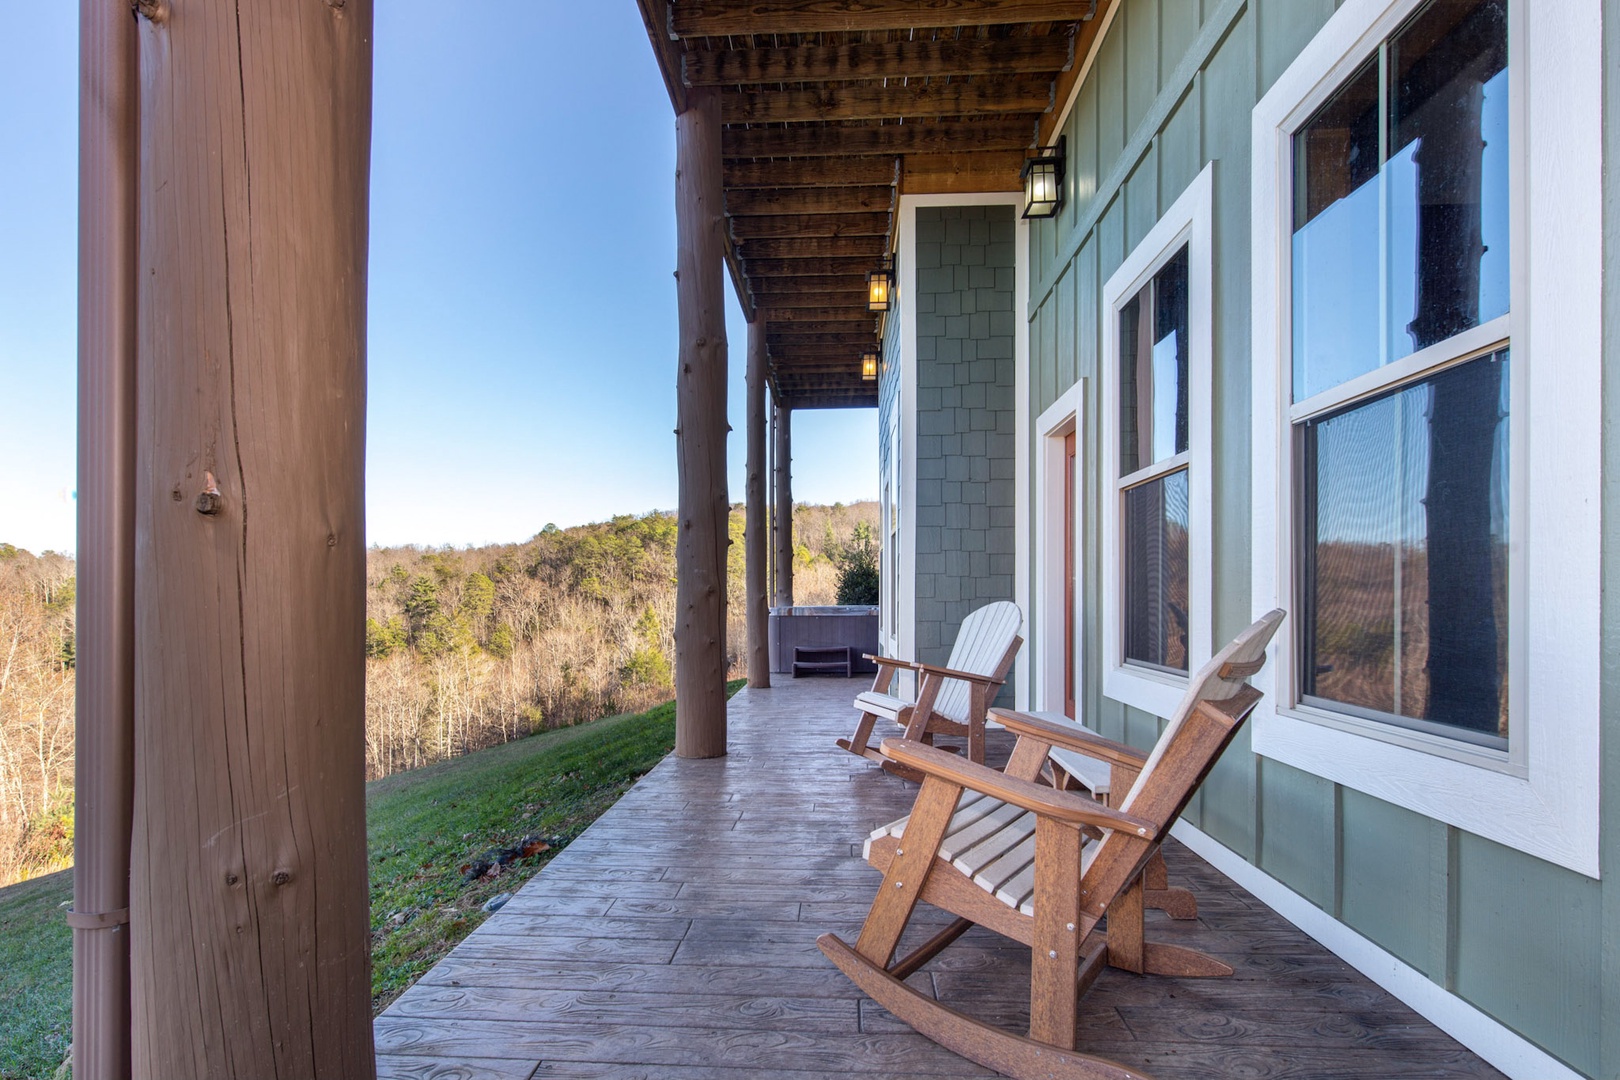 Stunning views await from every level of this home's rear deck areas